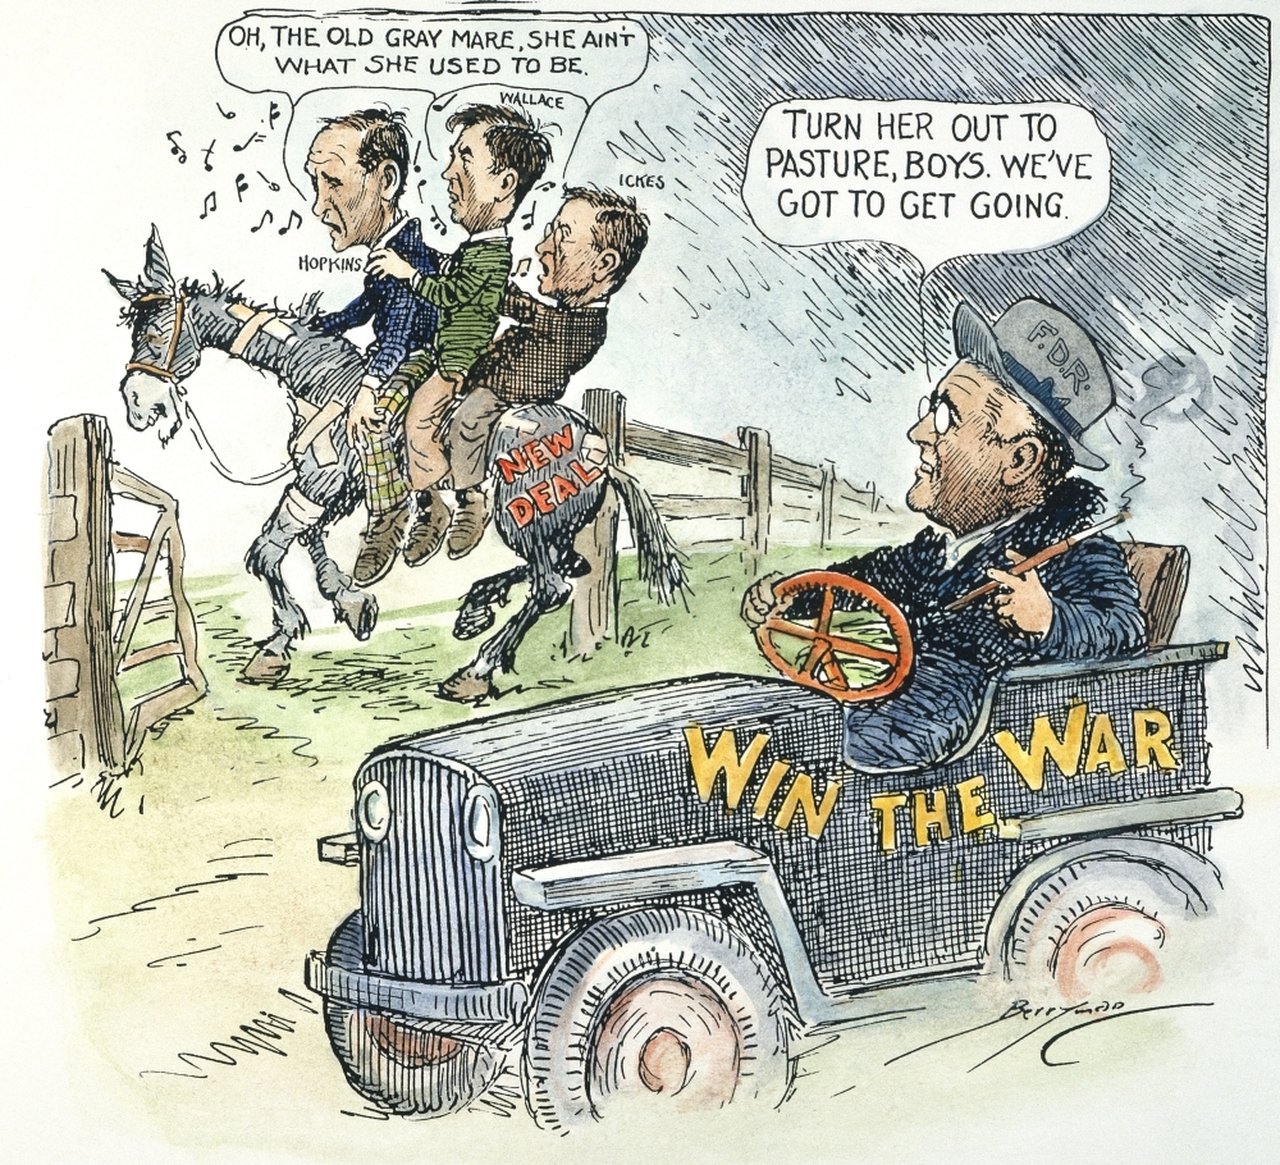  The New Deal and Recovery, Part 19: War, and Peace